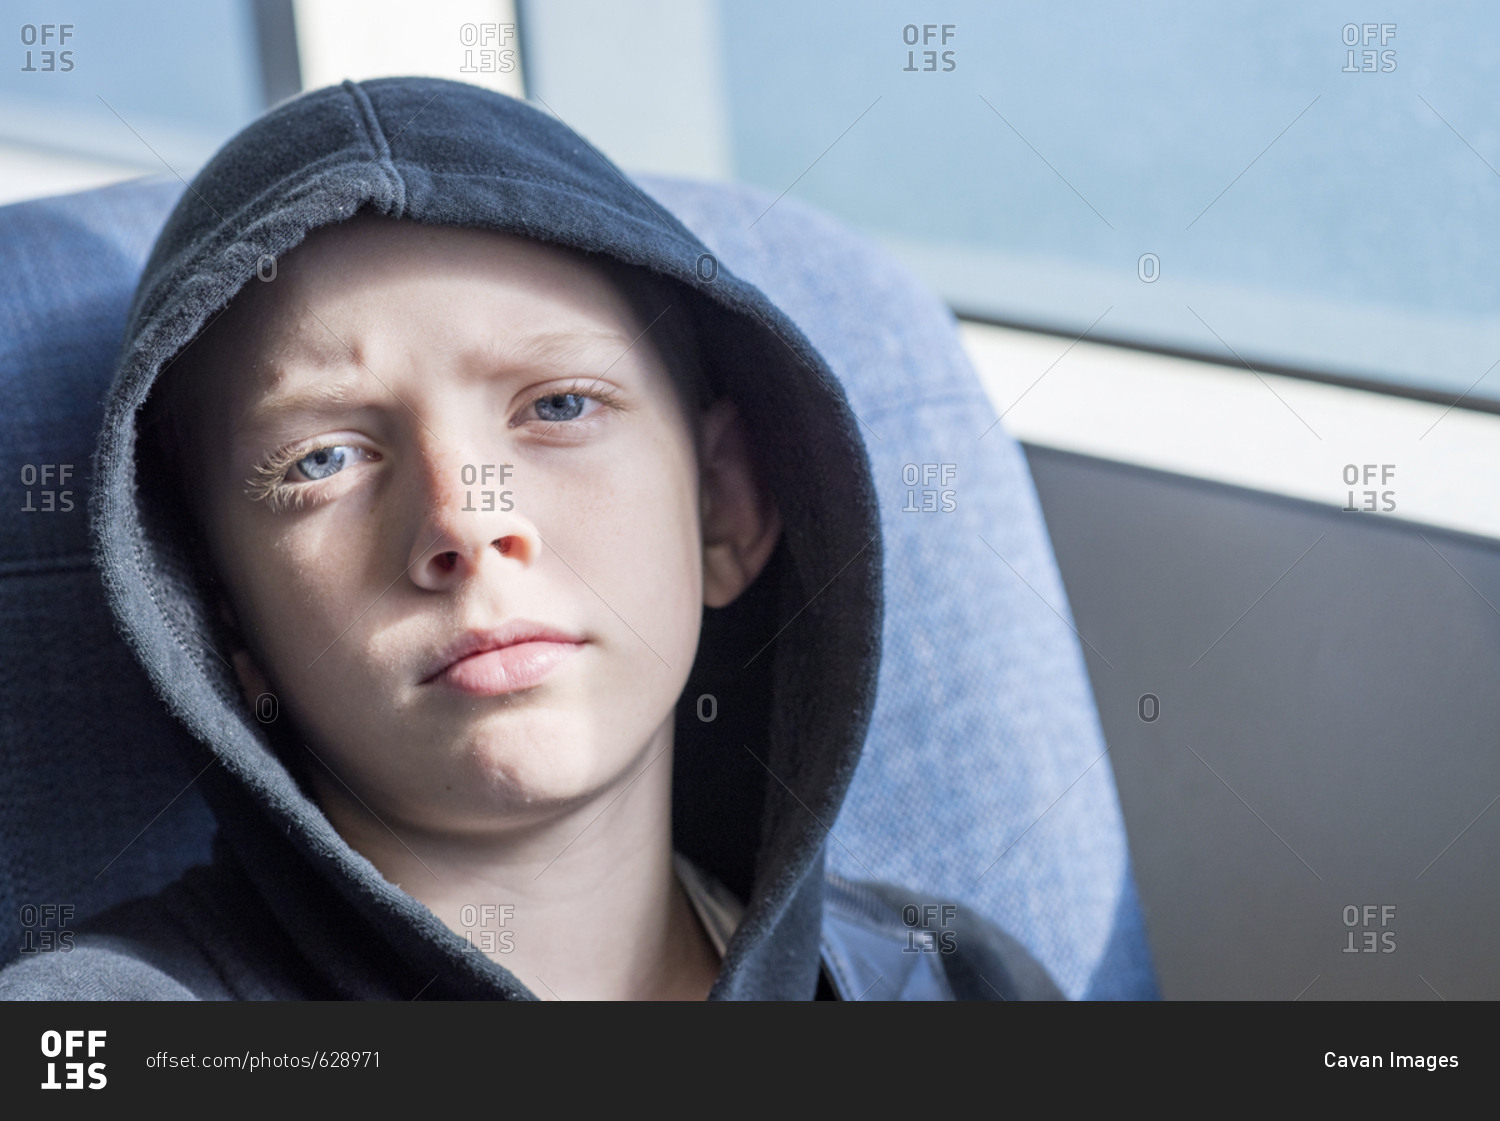 Close-up portrait of confident boy wearing hooded shirt in bus